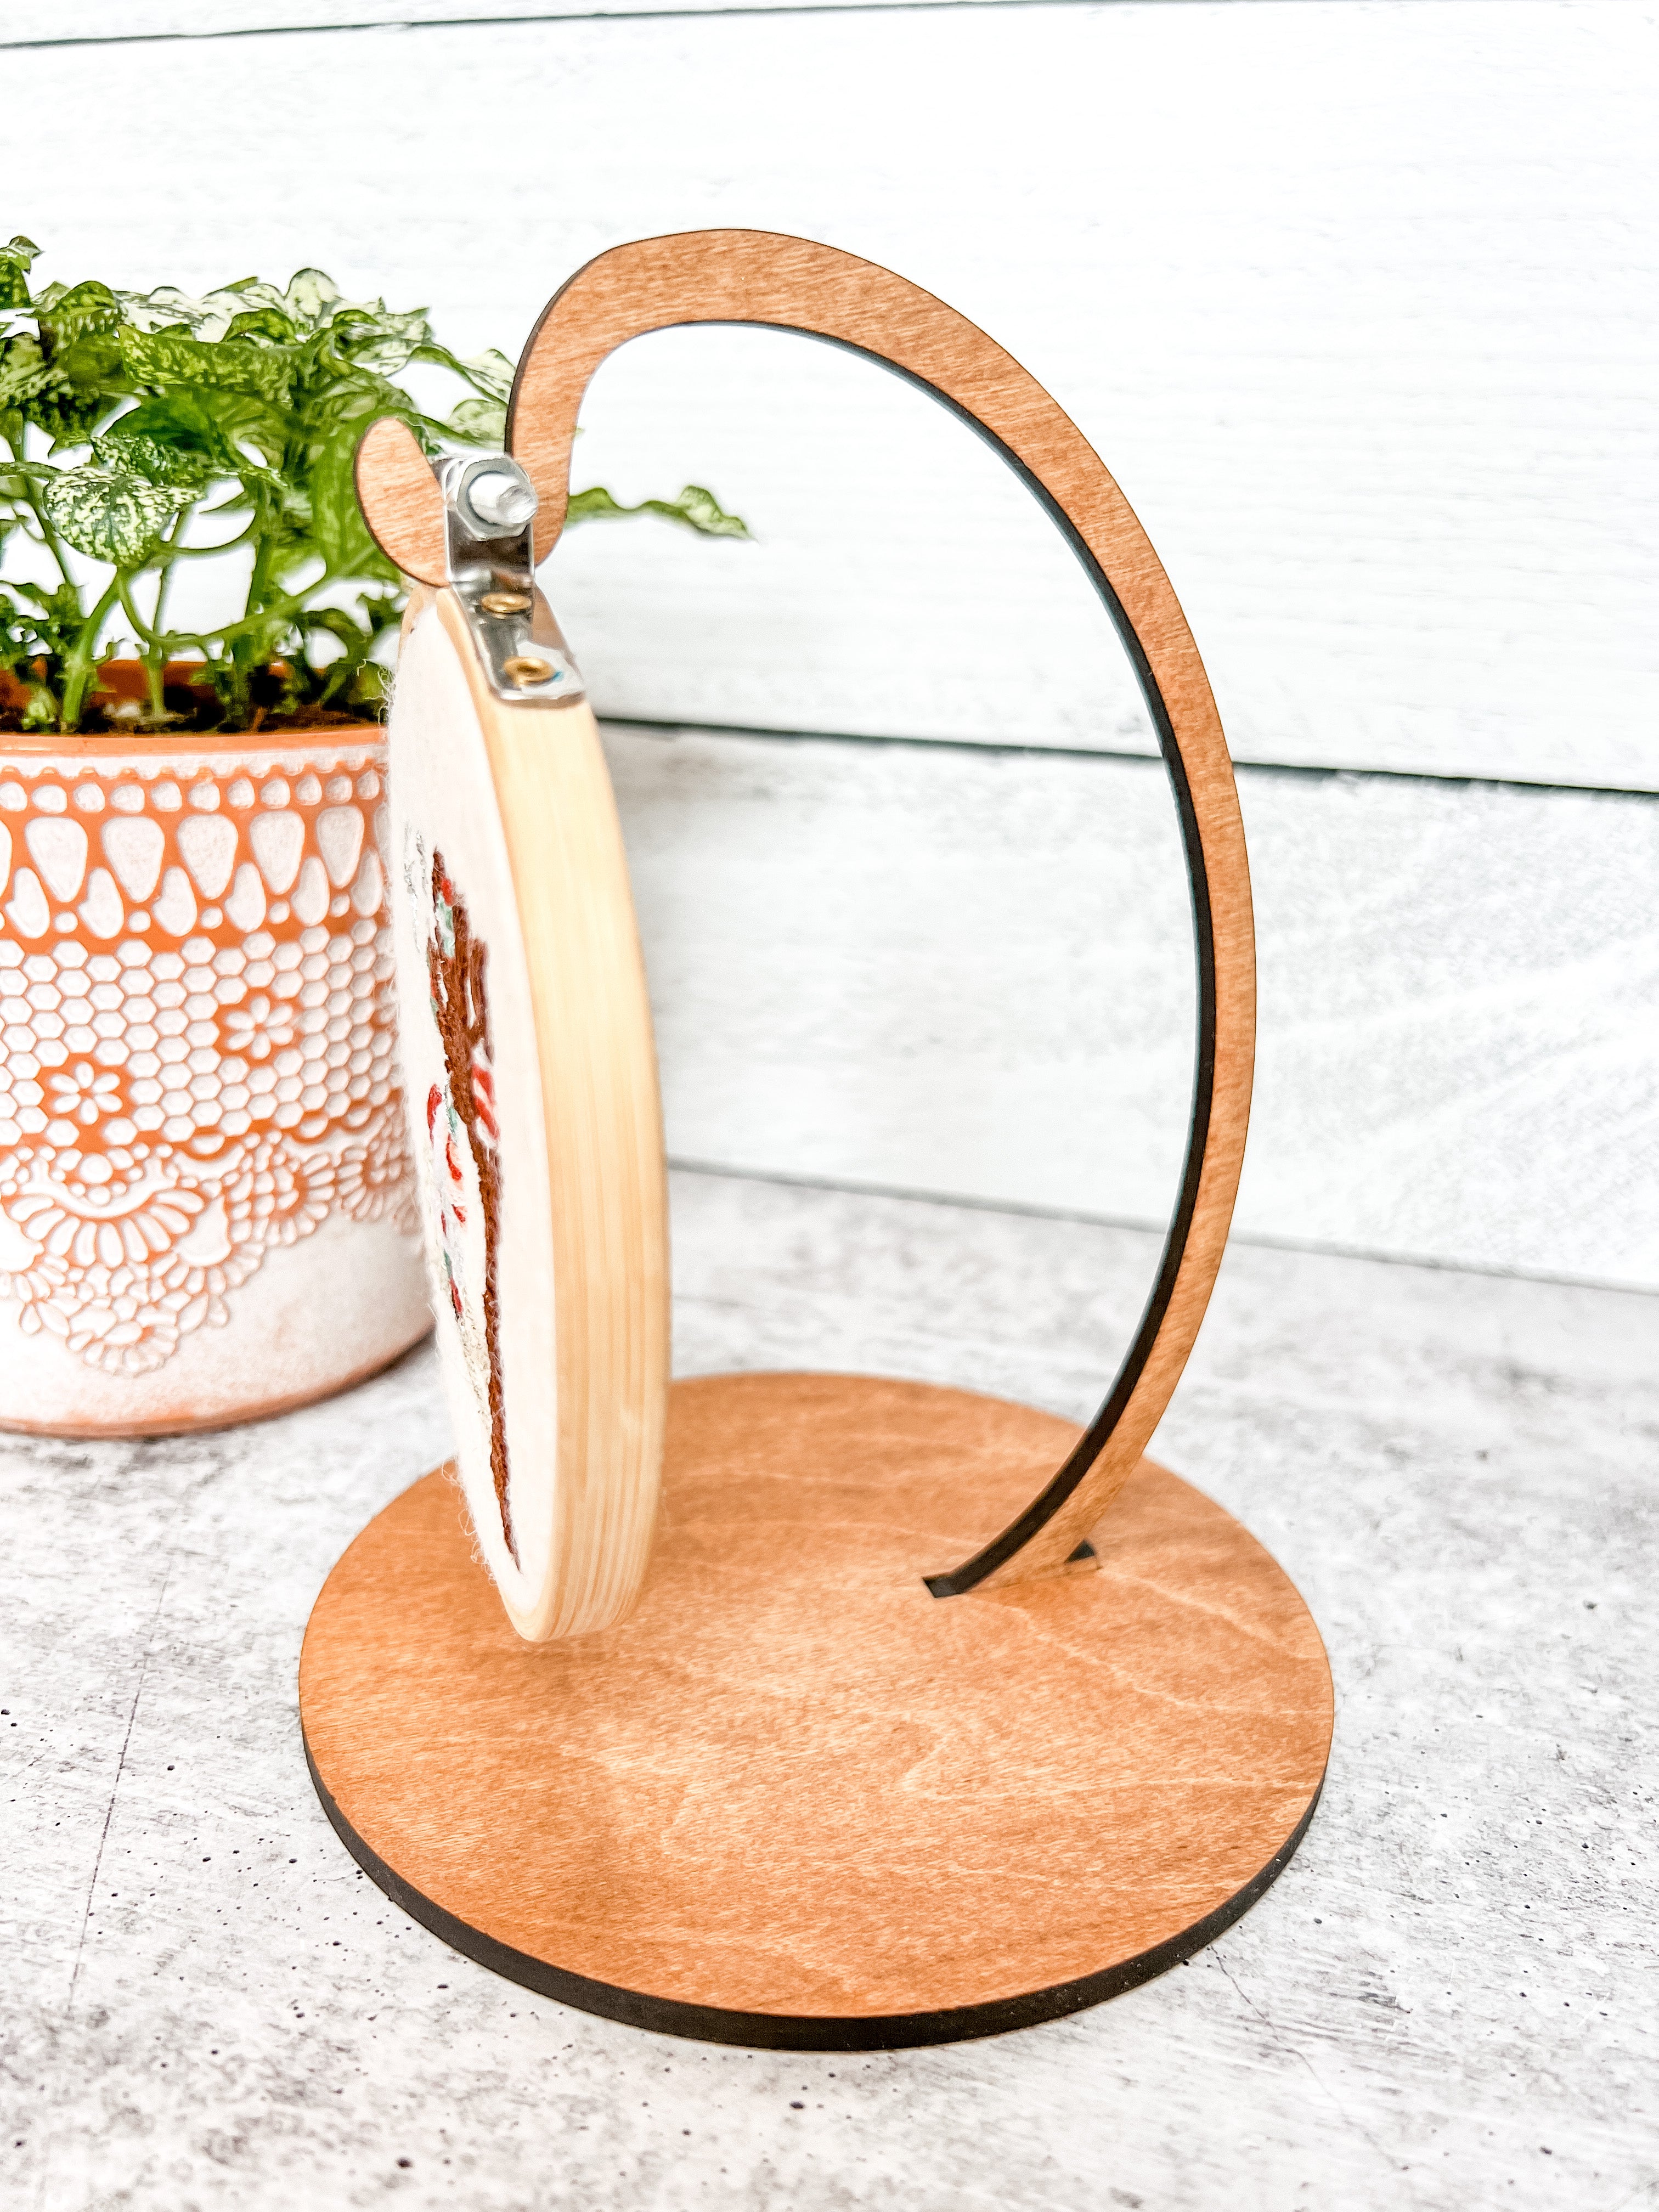 Embroidery Hoop Stand